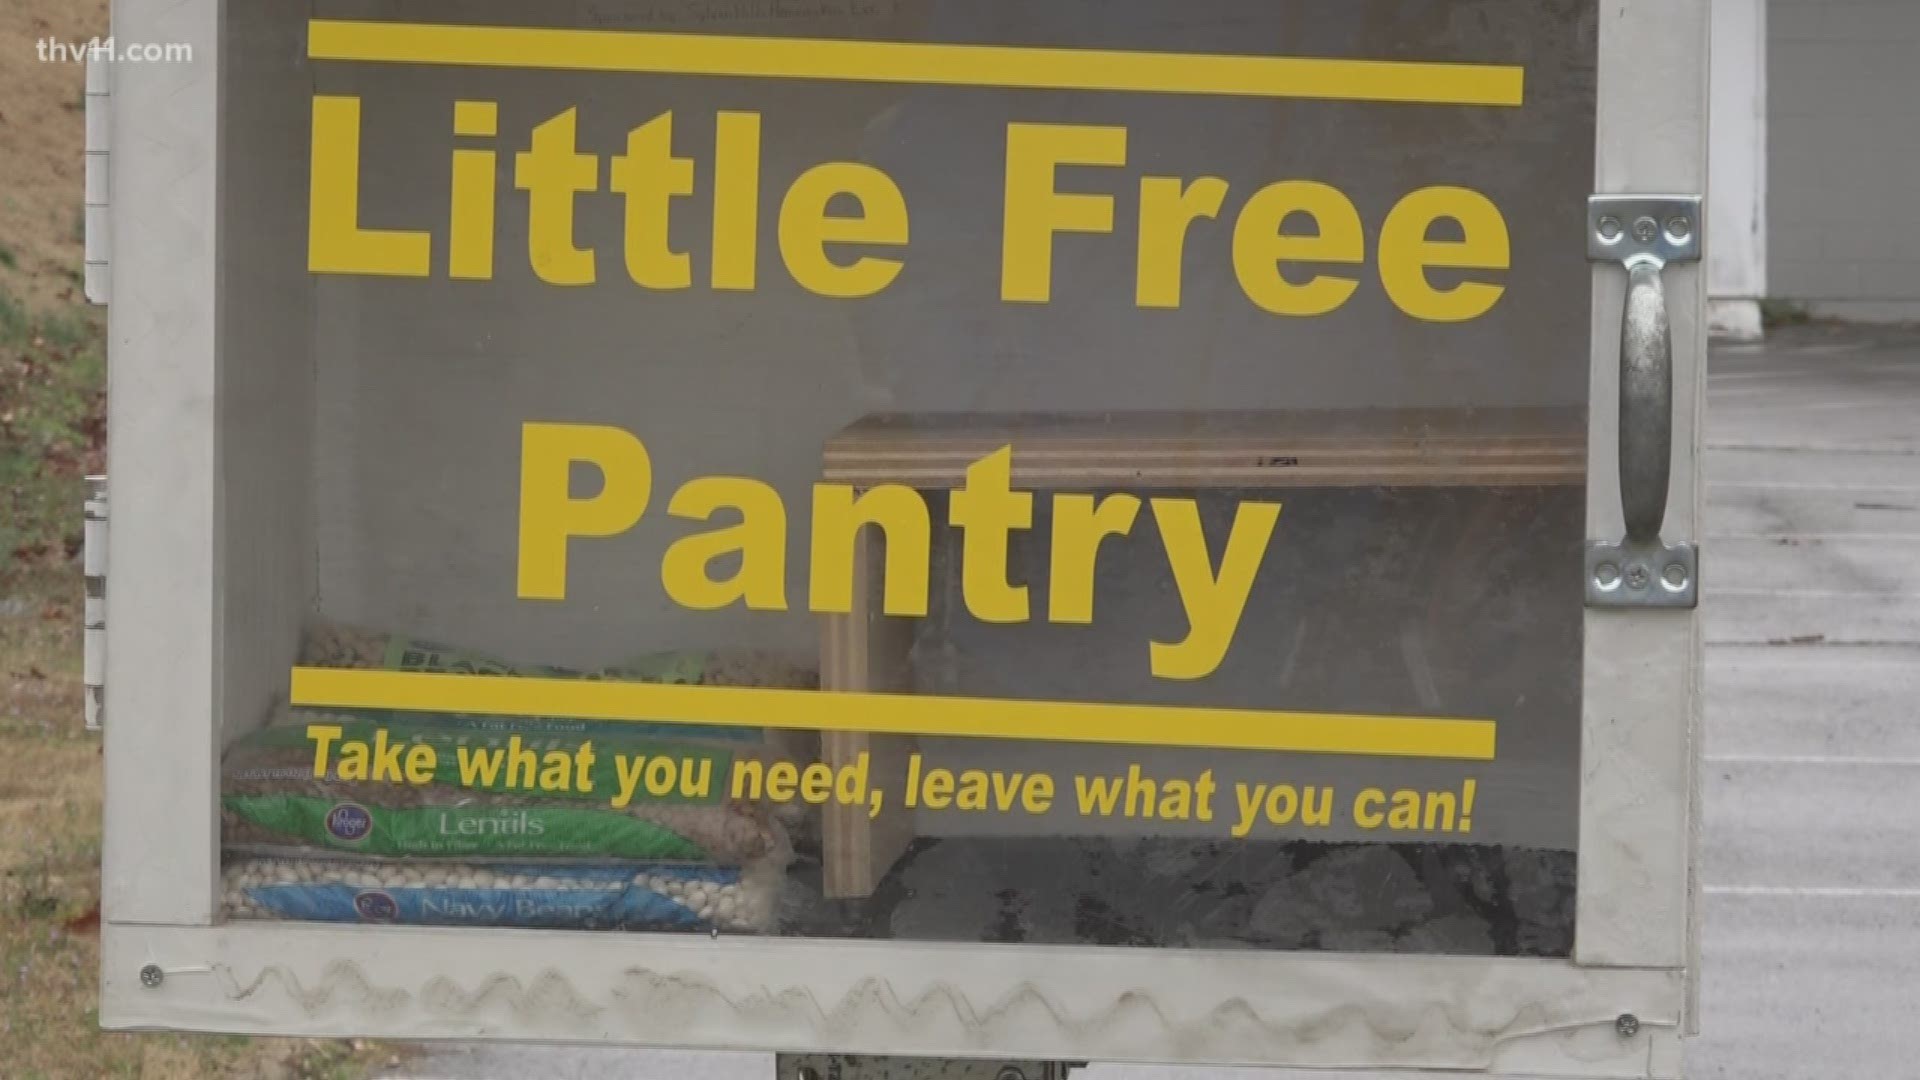 Volunteers with "The Little Free Pantry of Sherwood" say the organization is in desperate need of extra donations.